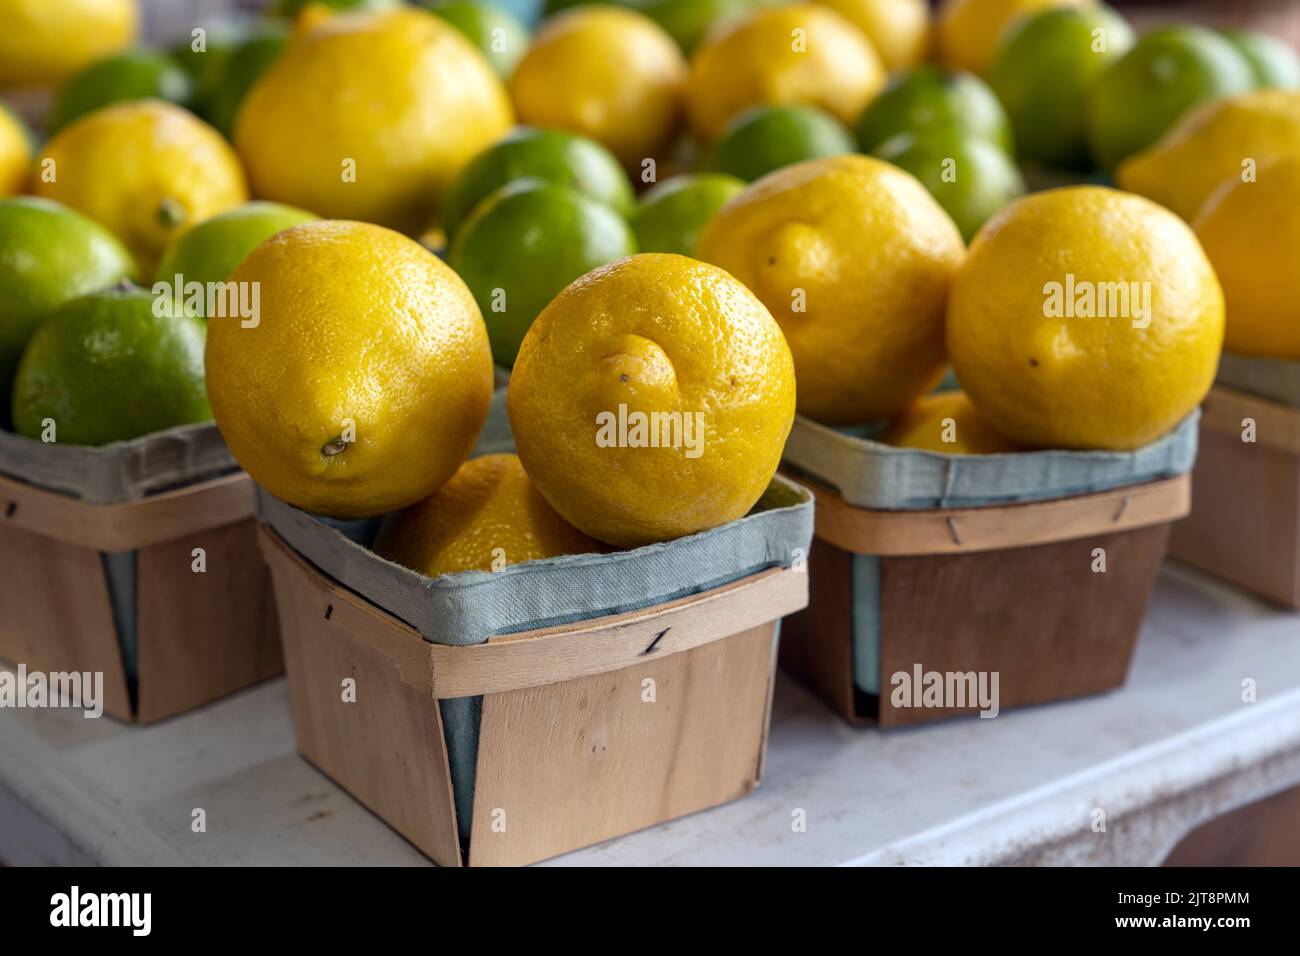 lemons and limes on sales at summer market Stock Photo